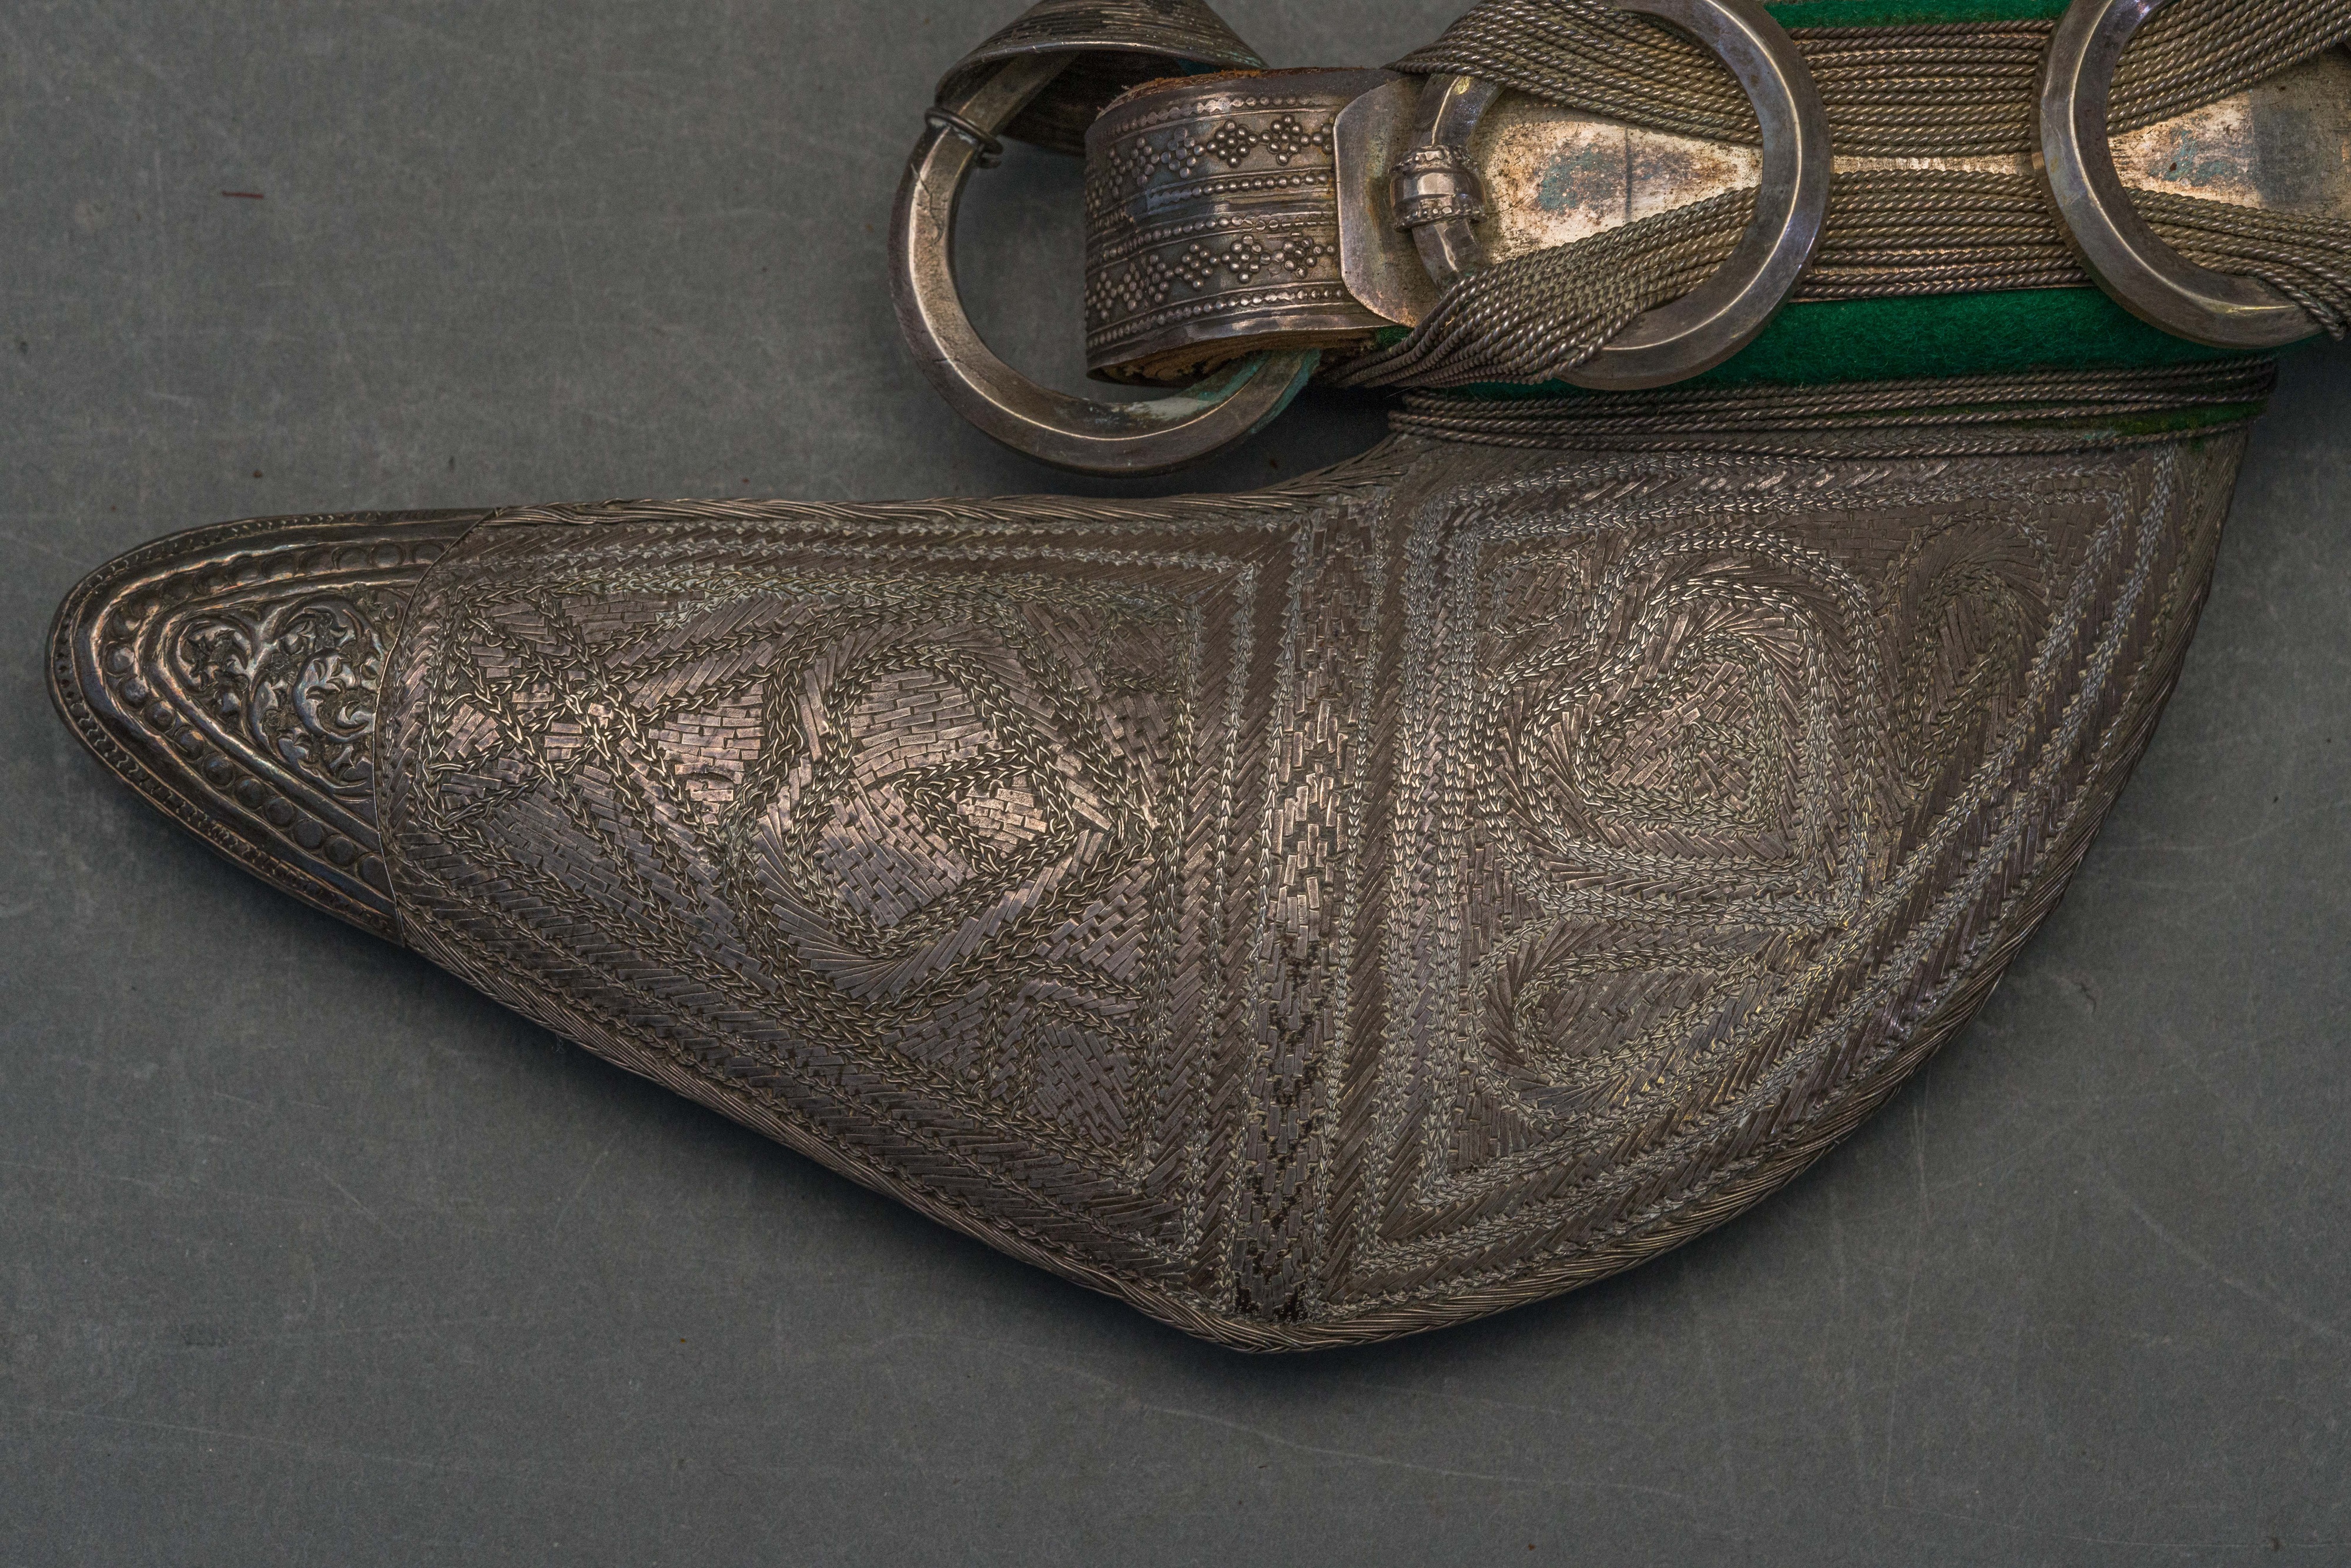 AN ARAB DAGGER (JAMBIYA) WITH SILVER-MOUNTED HILT, EARLY 20TH CENTURY - Image 8 of 10